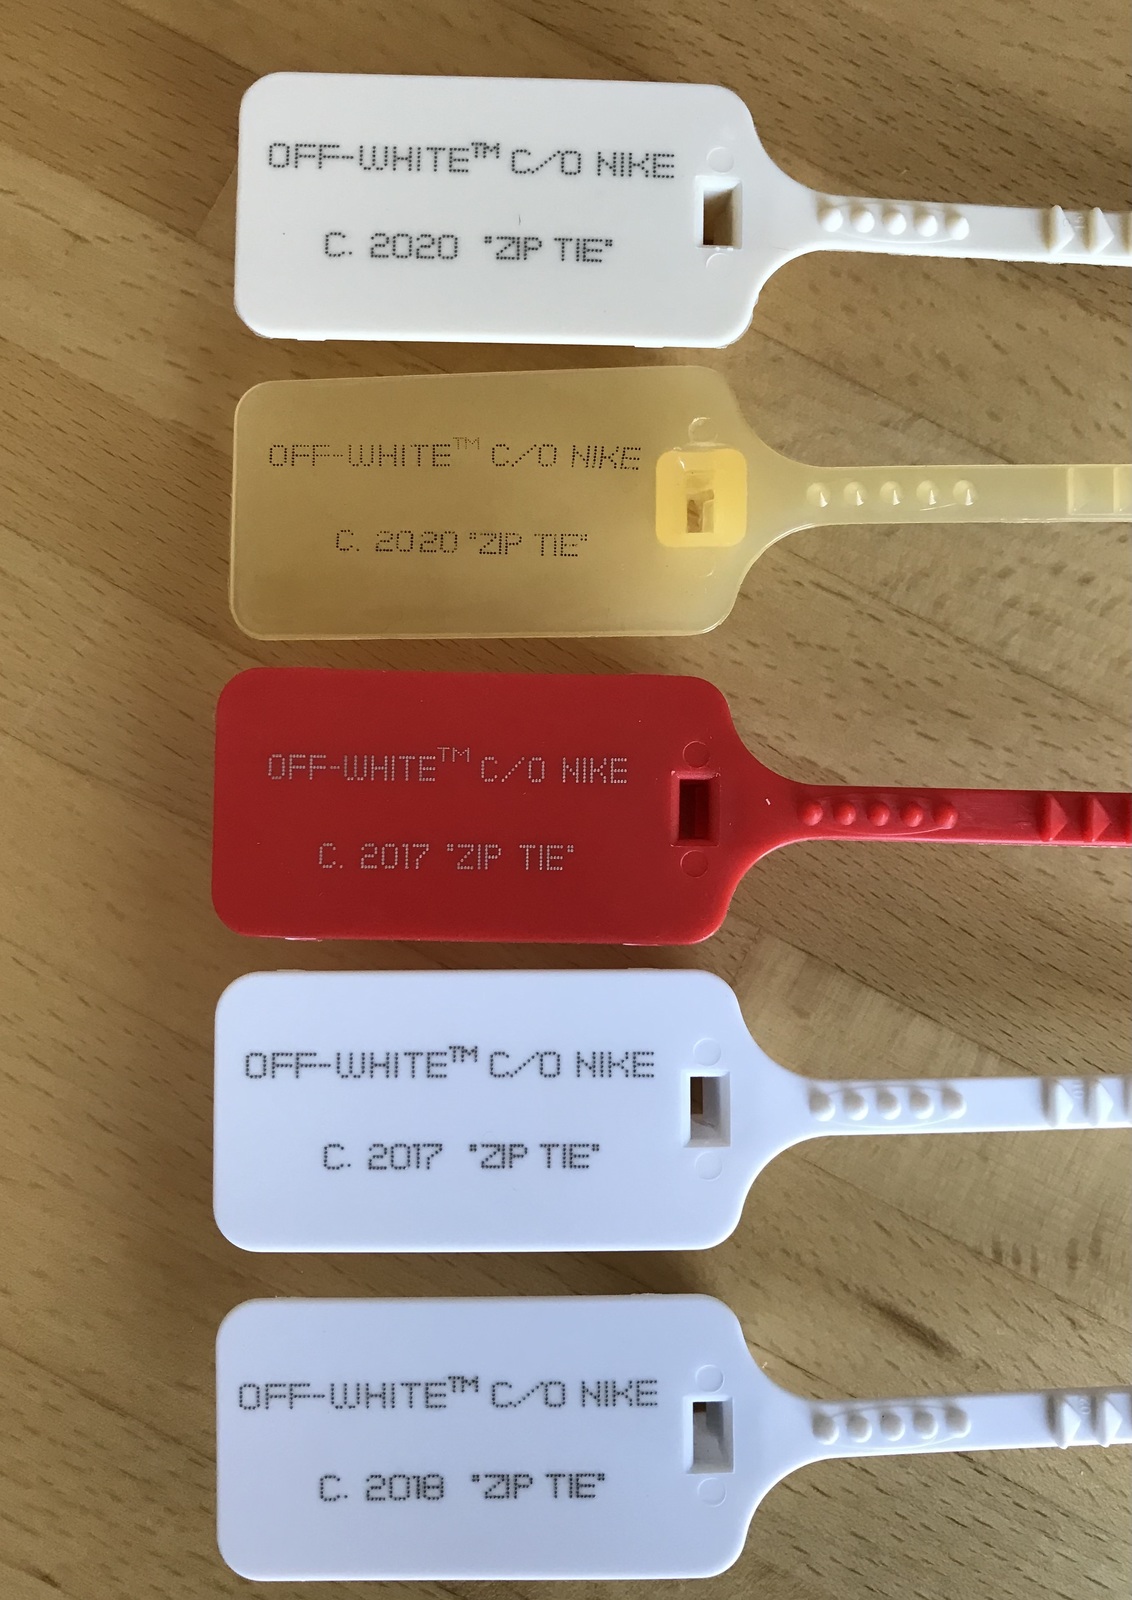 FAST SHIPPING "The Ten" ZIP TIE TAG  Replacement  x Off-White! Multi Colors Zip - $17.00 - $19.95